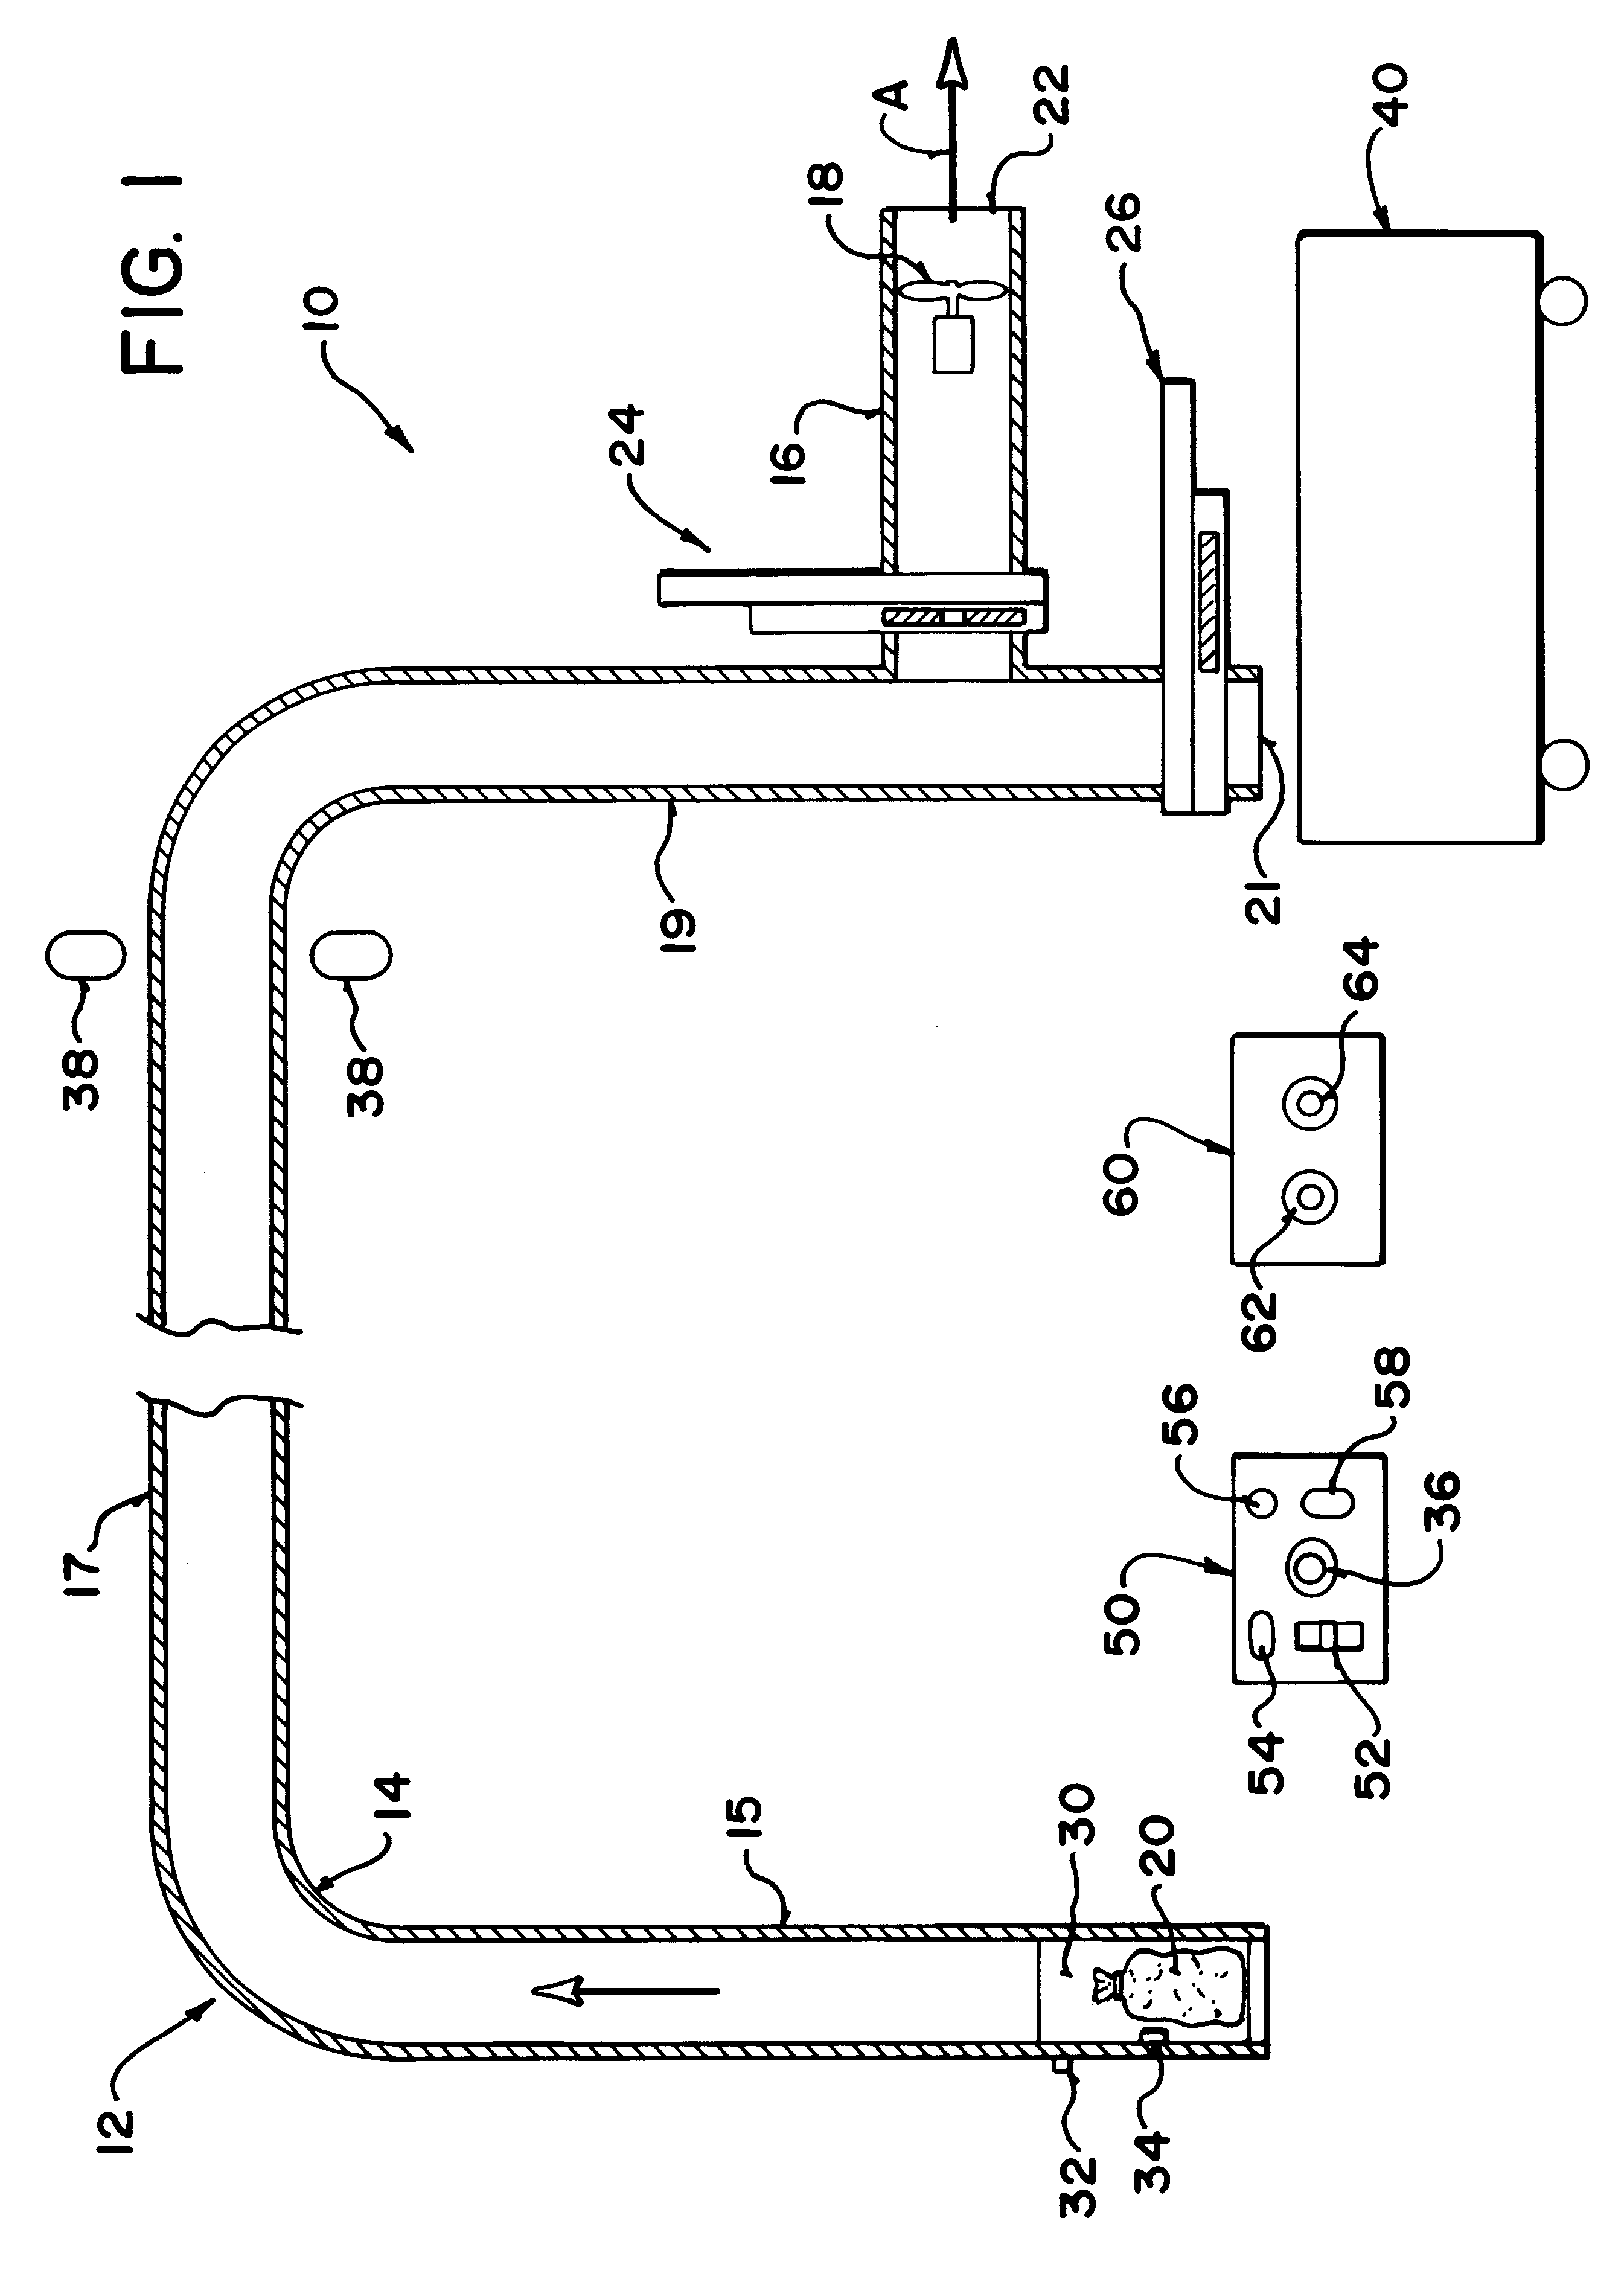 Pneumatic apparatus and method for transporting irregularly-shaped objects